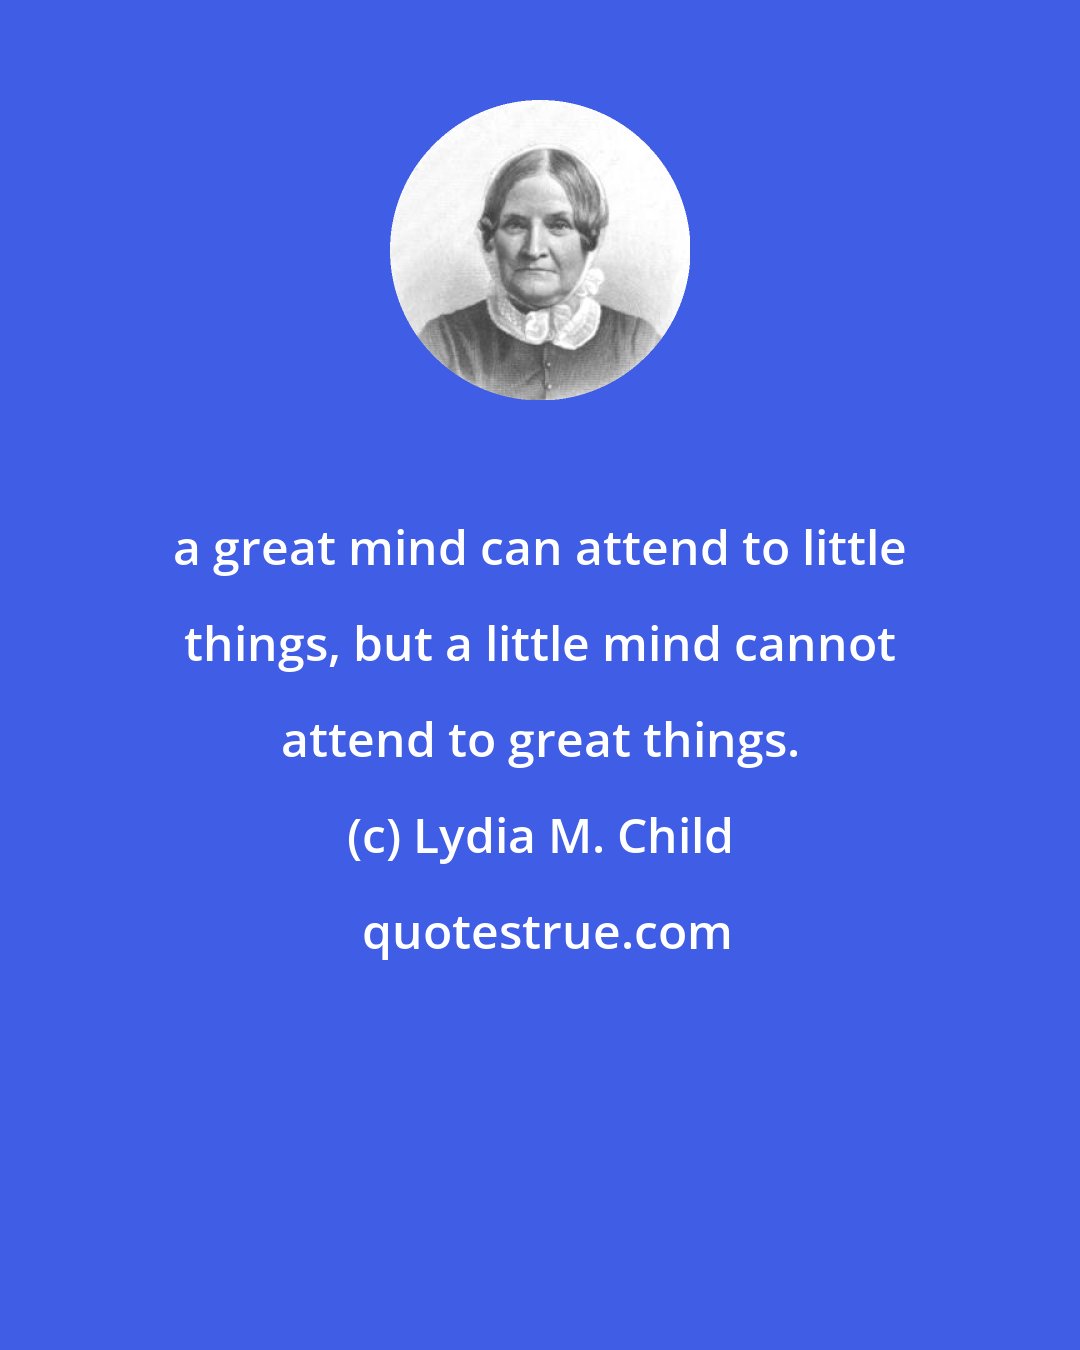 Lydia M. Child: a great mind can attend to little things, but a little mind cannot attend to great things.